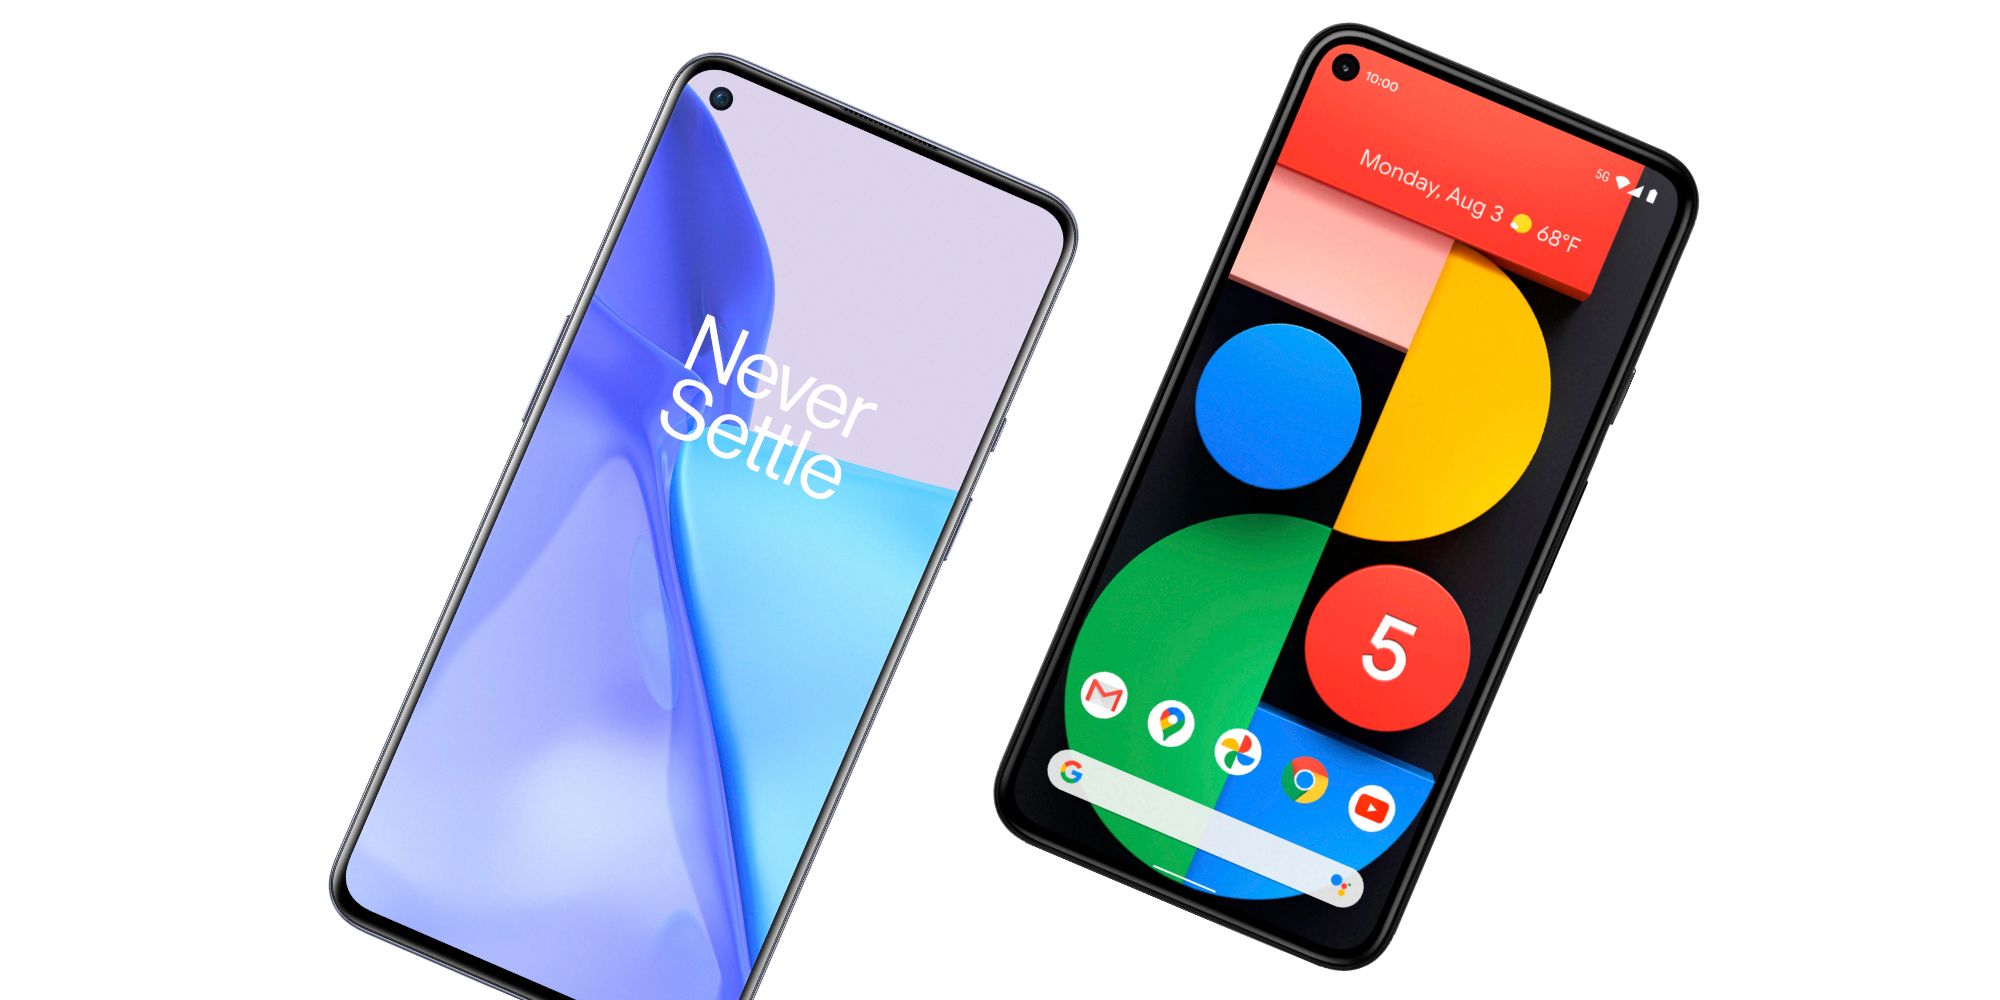 Renders of the OnePlus 9 and Google Pixel 5